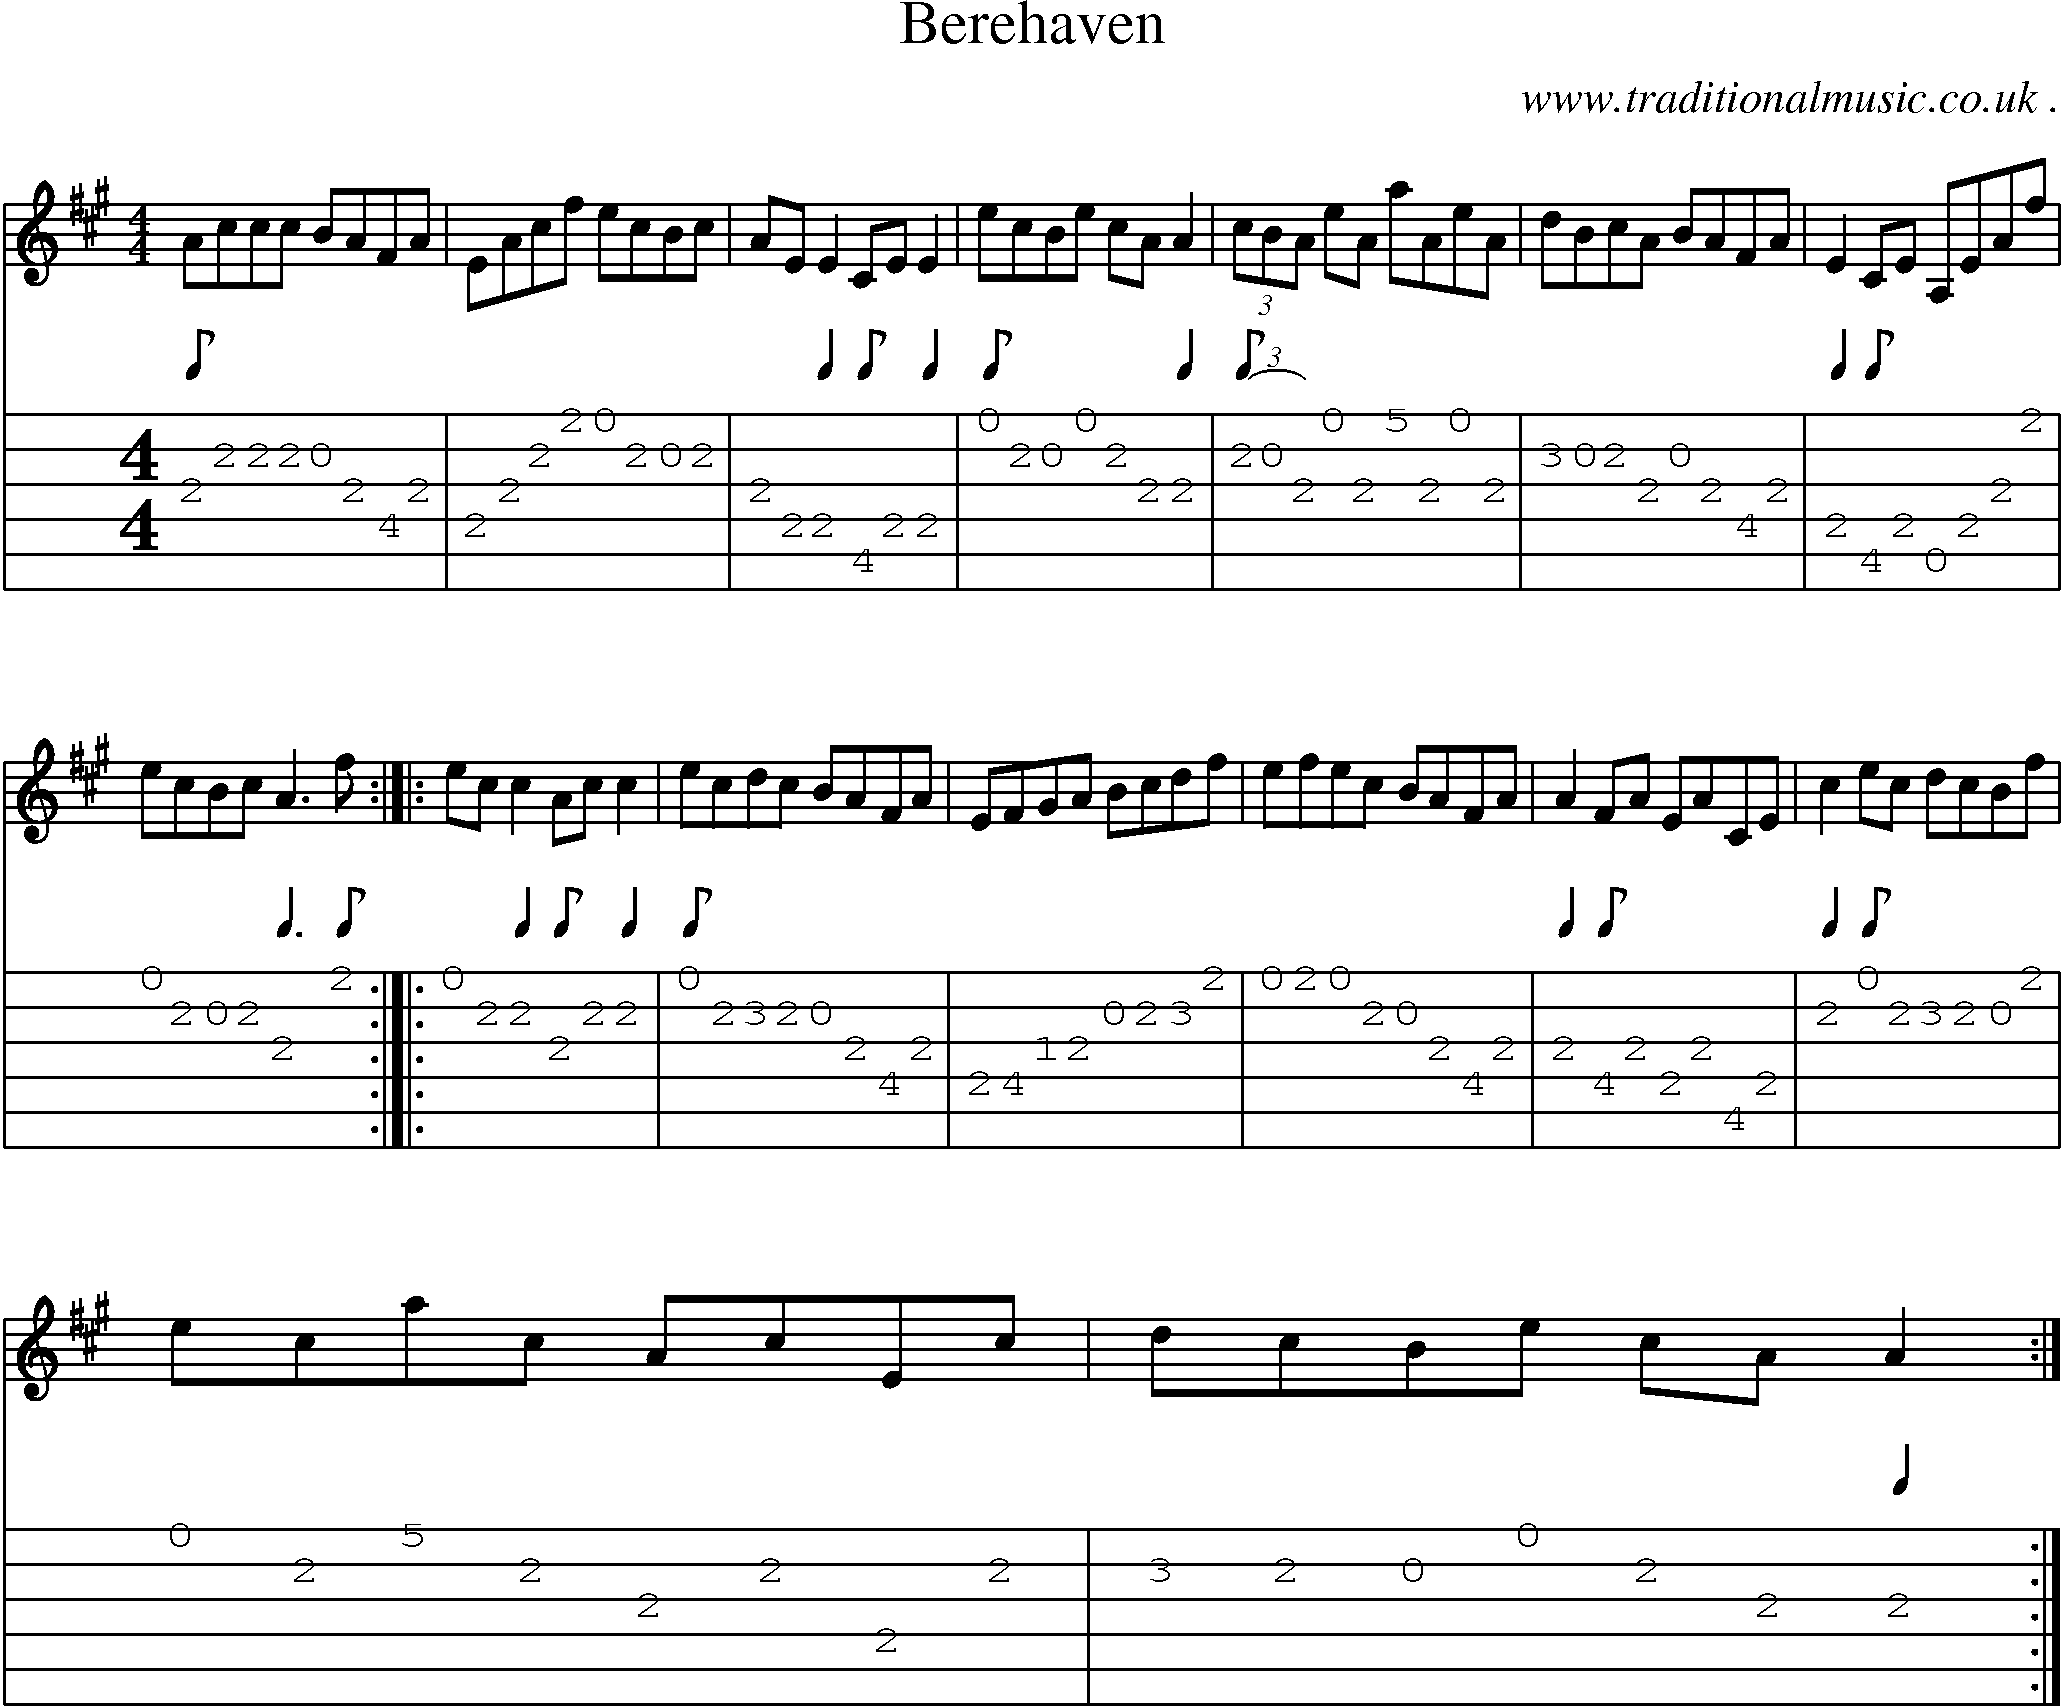 Sheet-Music and Guitar Tabs for Berehaven